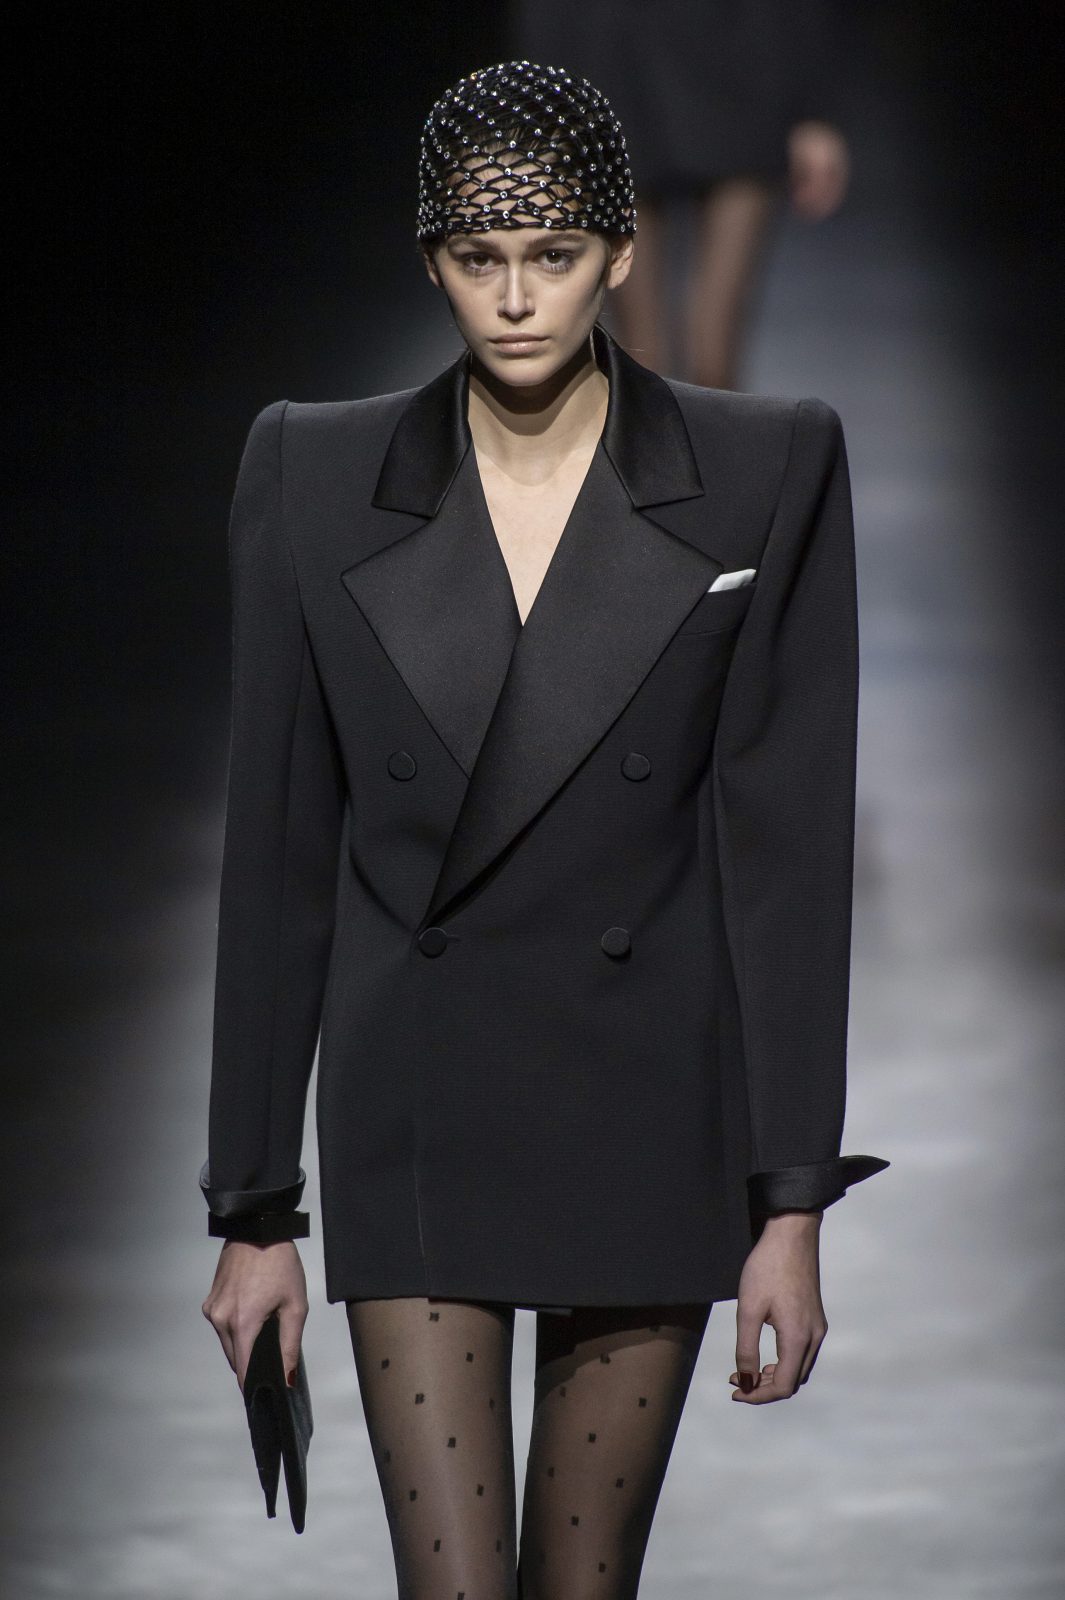 Women's Tailored Suits From The A/W19 Catwalk